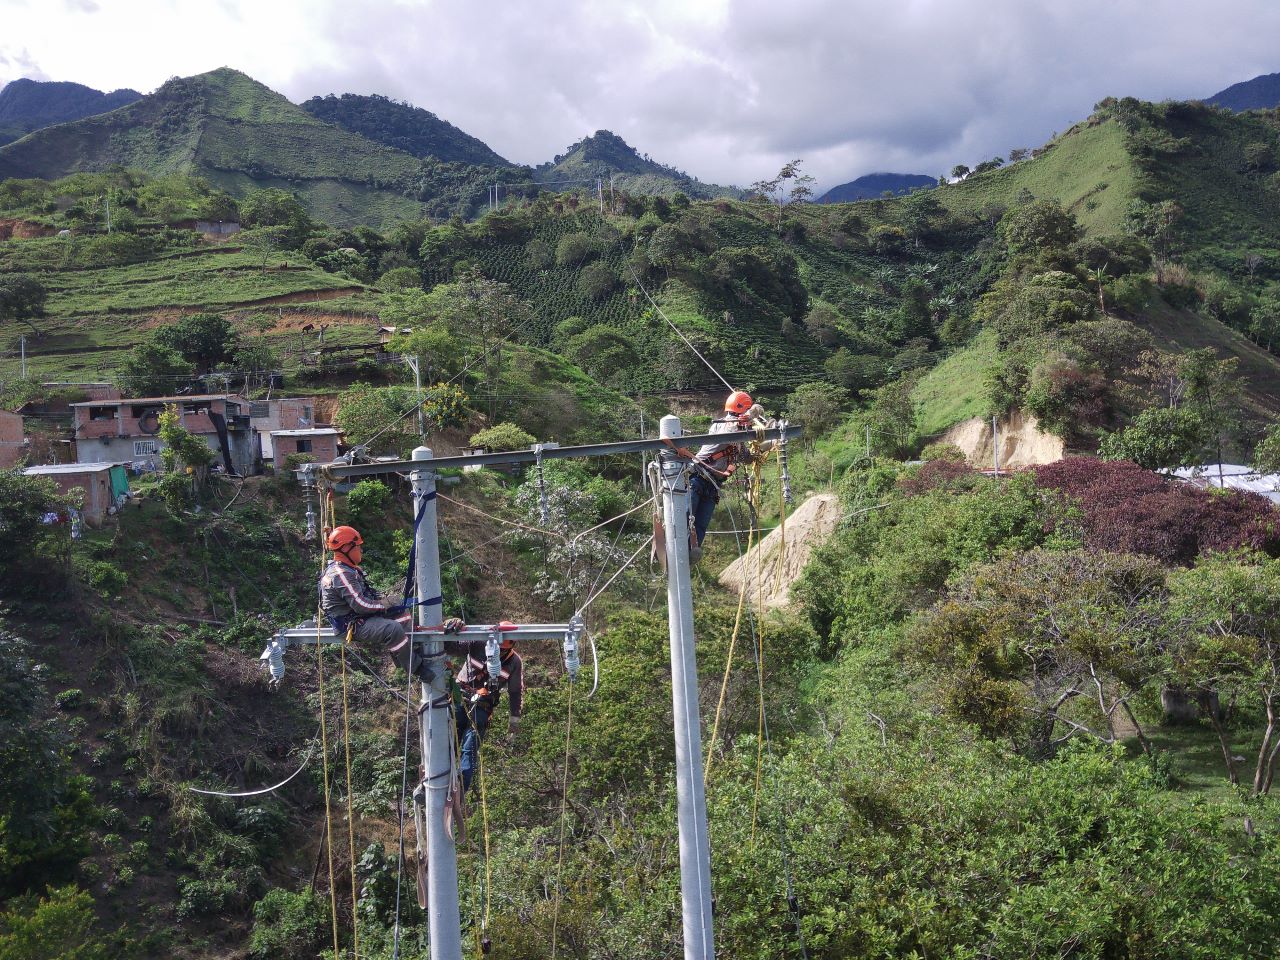 Celsia Has Invested More Than $6.11 Billion in Connection Standardization, Network Modernization and New Meters in Tolima